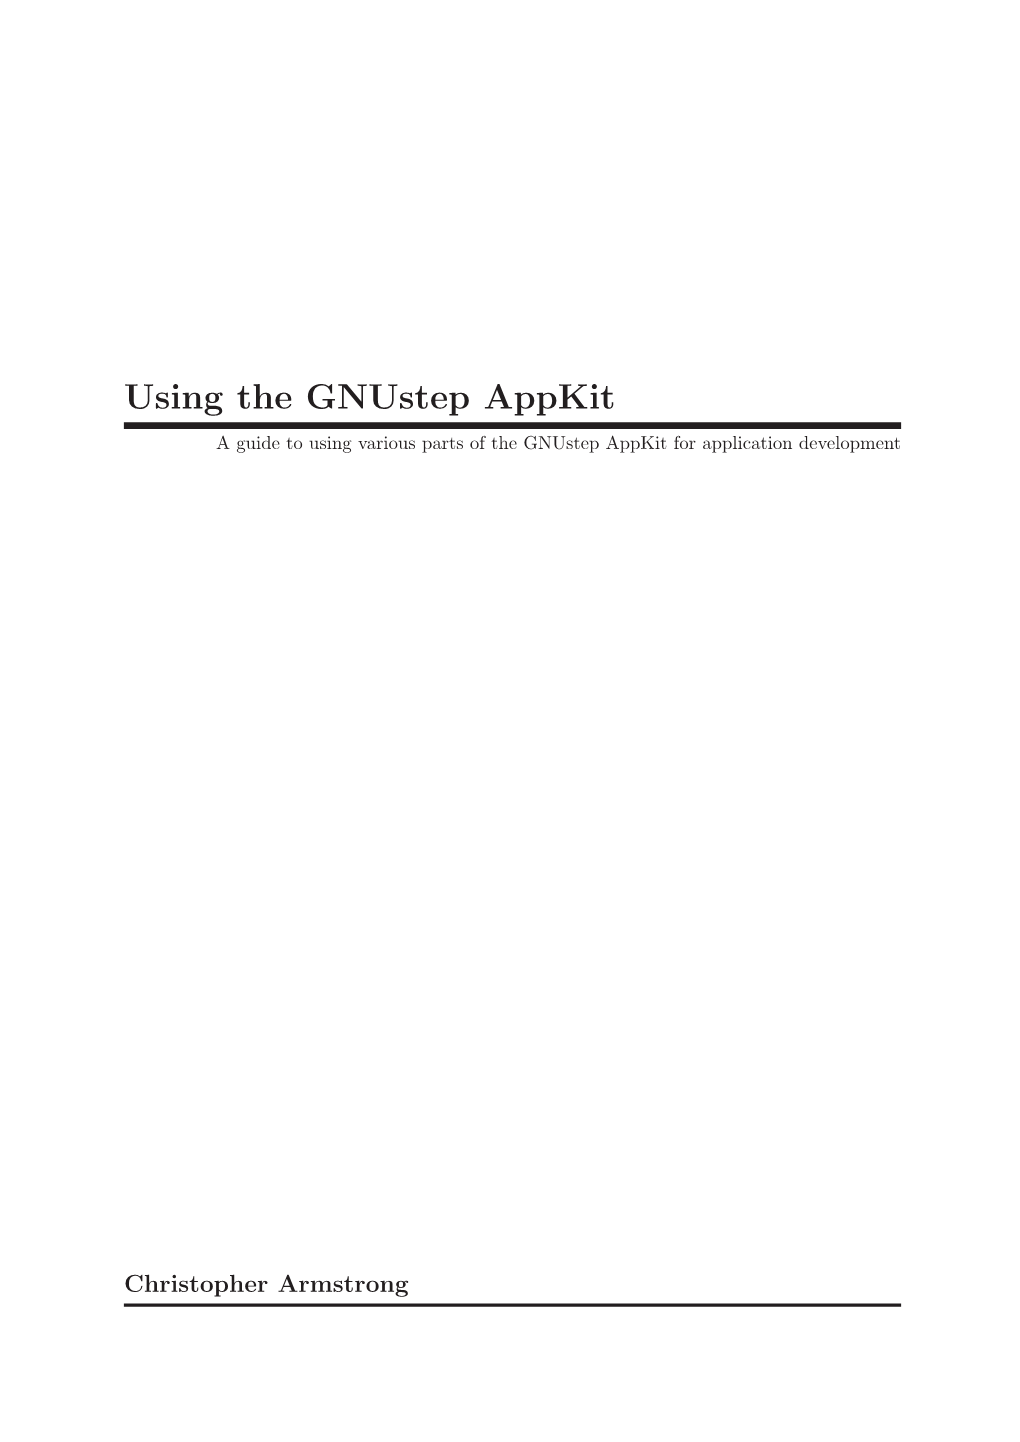 Using the Gnustep Appkit a Guide to Using Various Parts of the Gnustep Appkit for Application Development